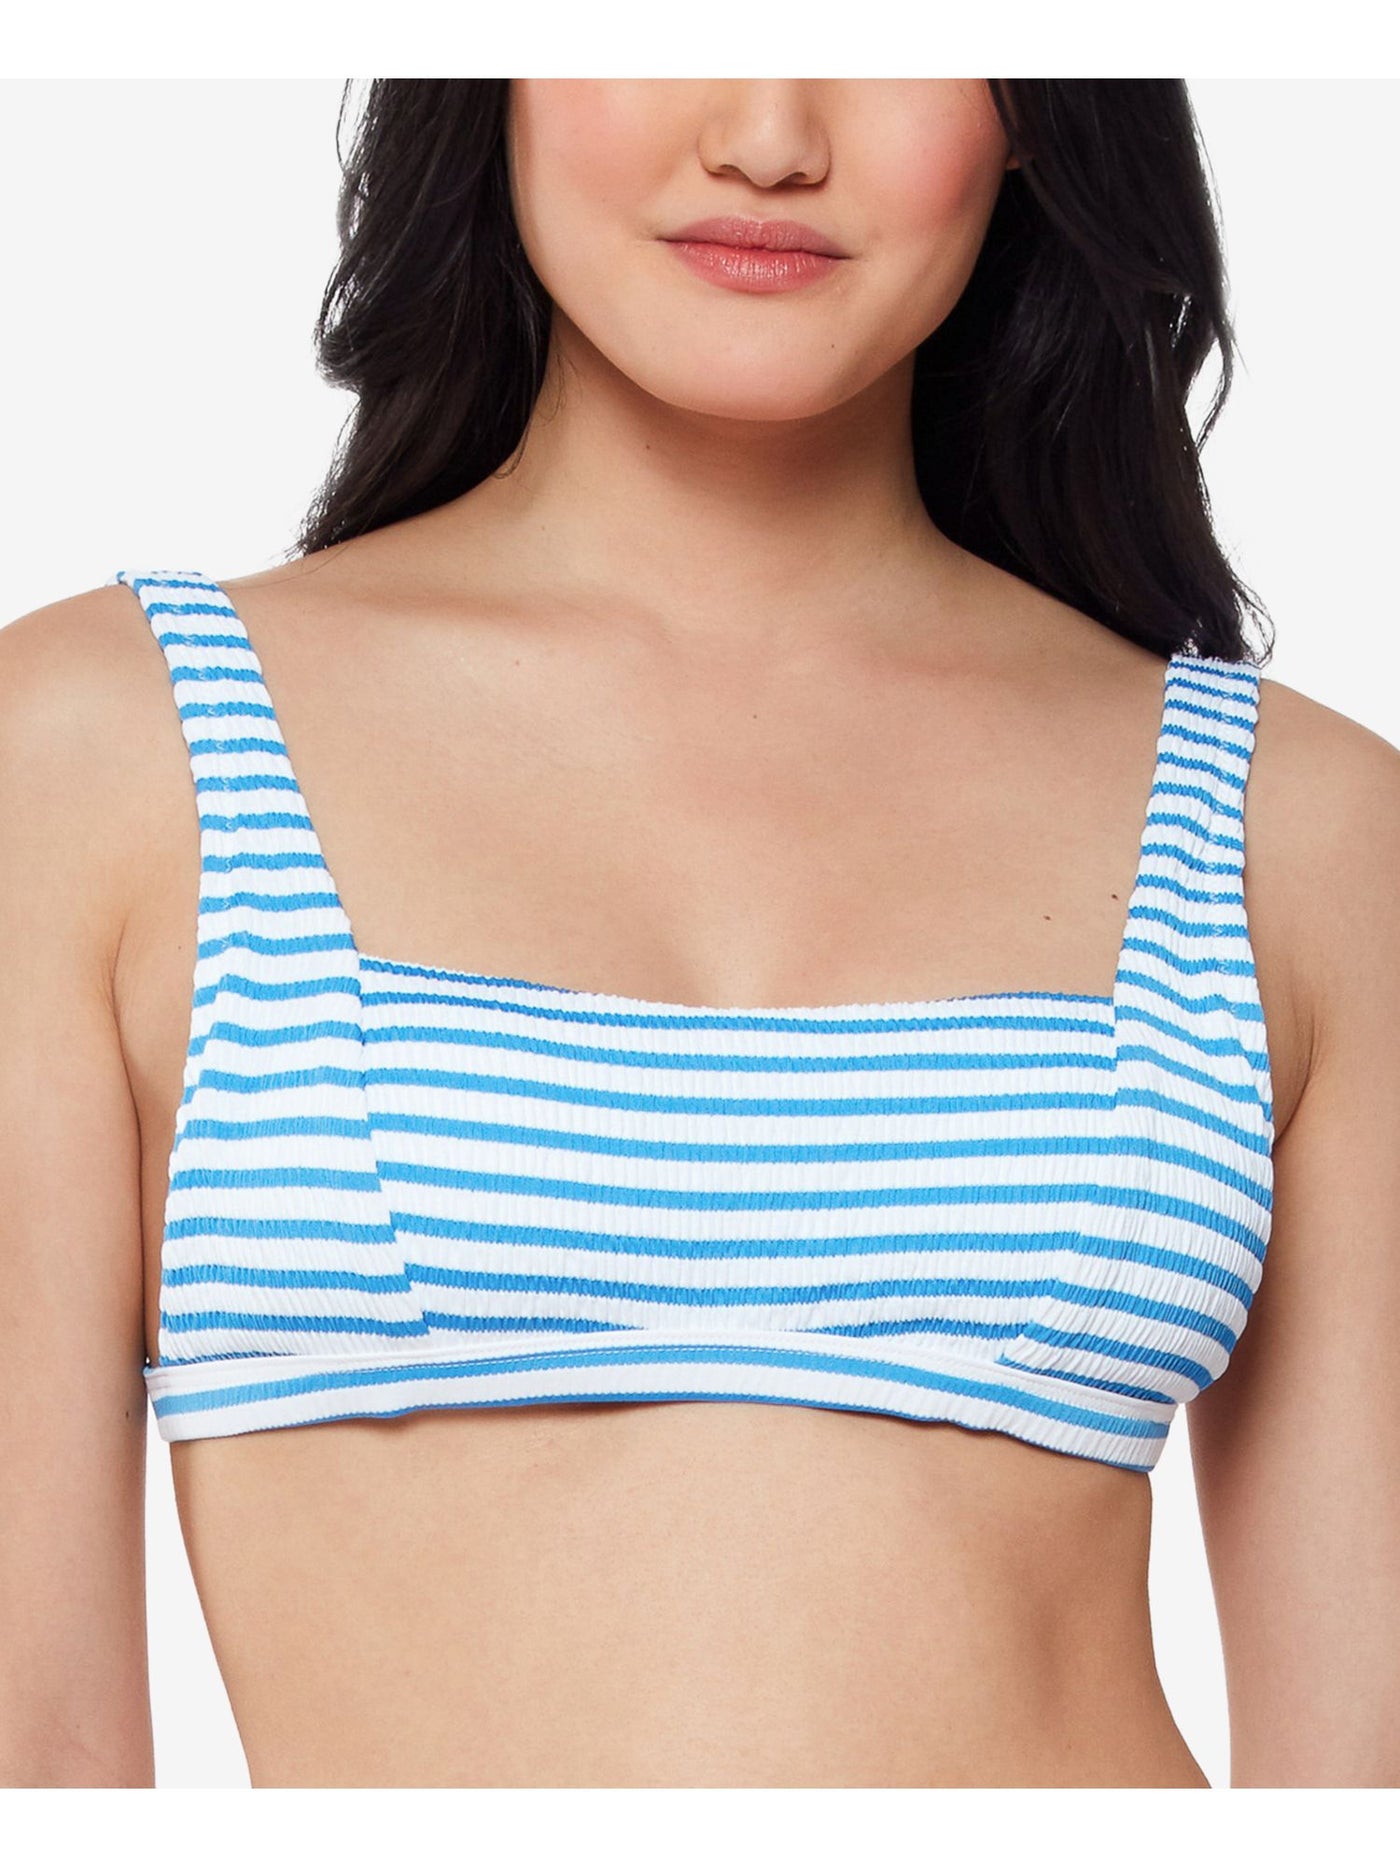 JESSICA SIMPSON Women's Blue Striped Stretch Removable Cups Tie Textured Adjustable Square Neck Swimsuit Top L